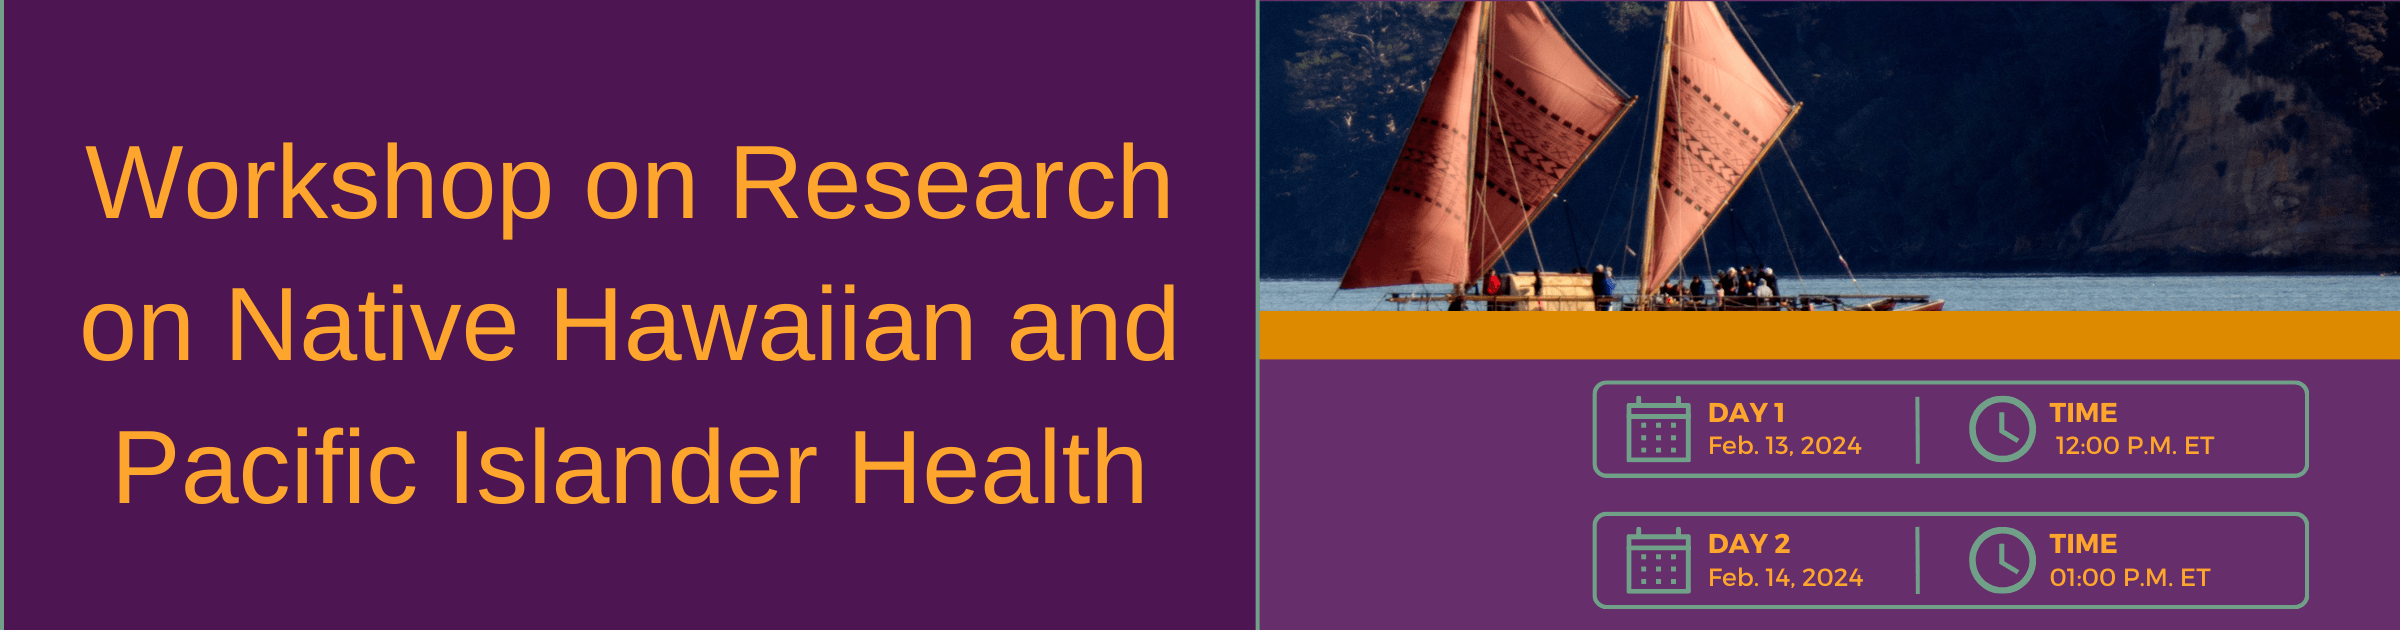 Workshop on Research on Native Hawaiian and Pacific Islander Health, Feb. 13-14 with image of wooden Maori double hull canoe